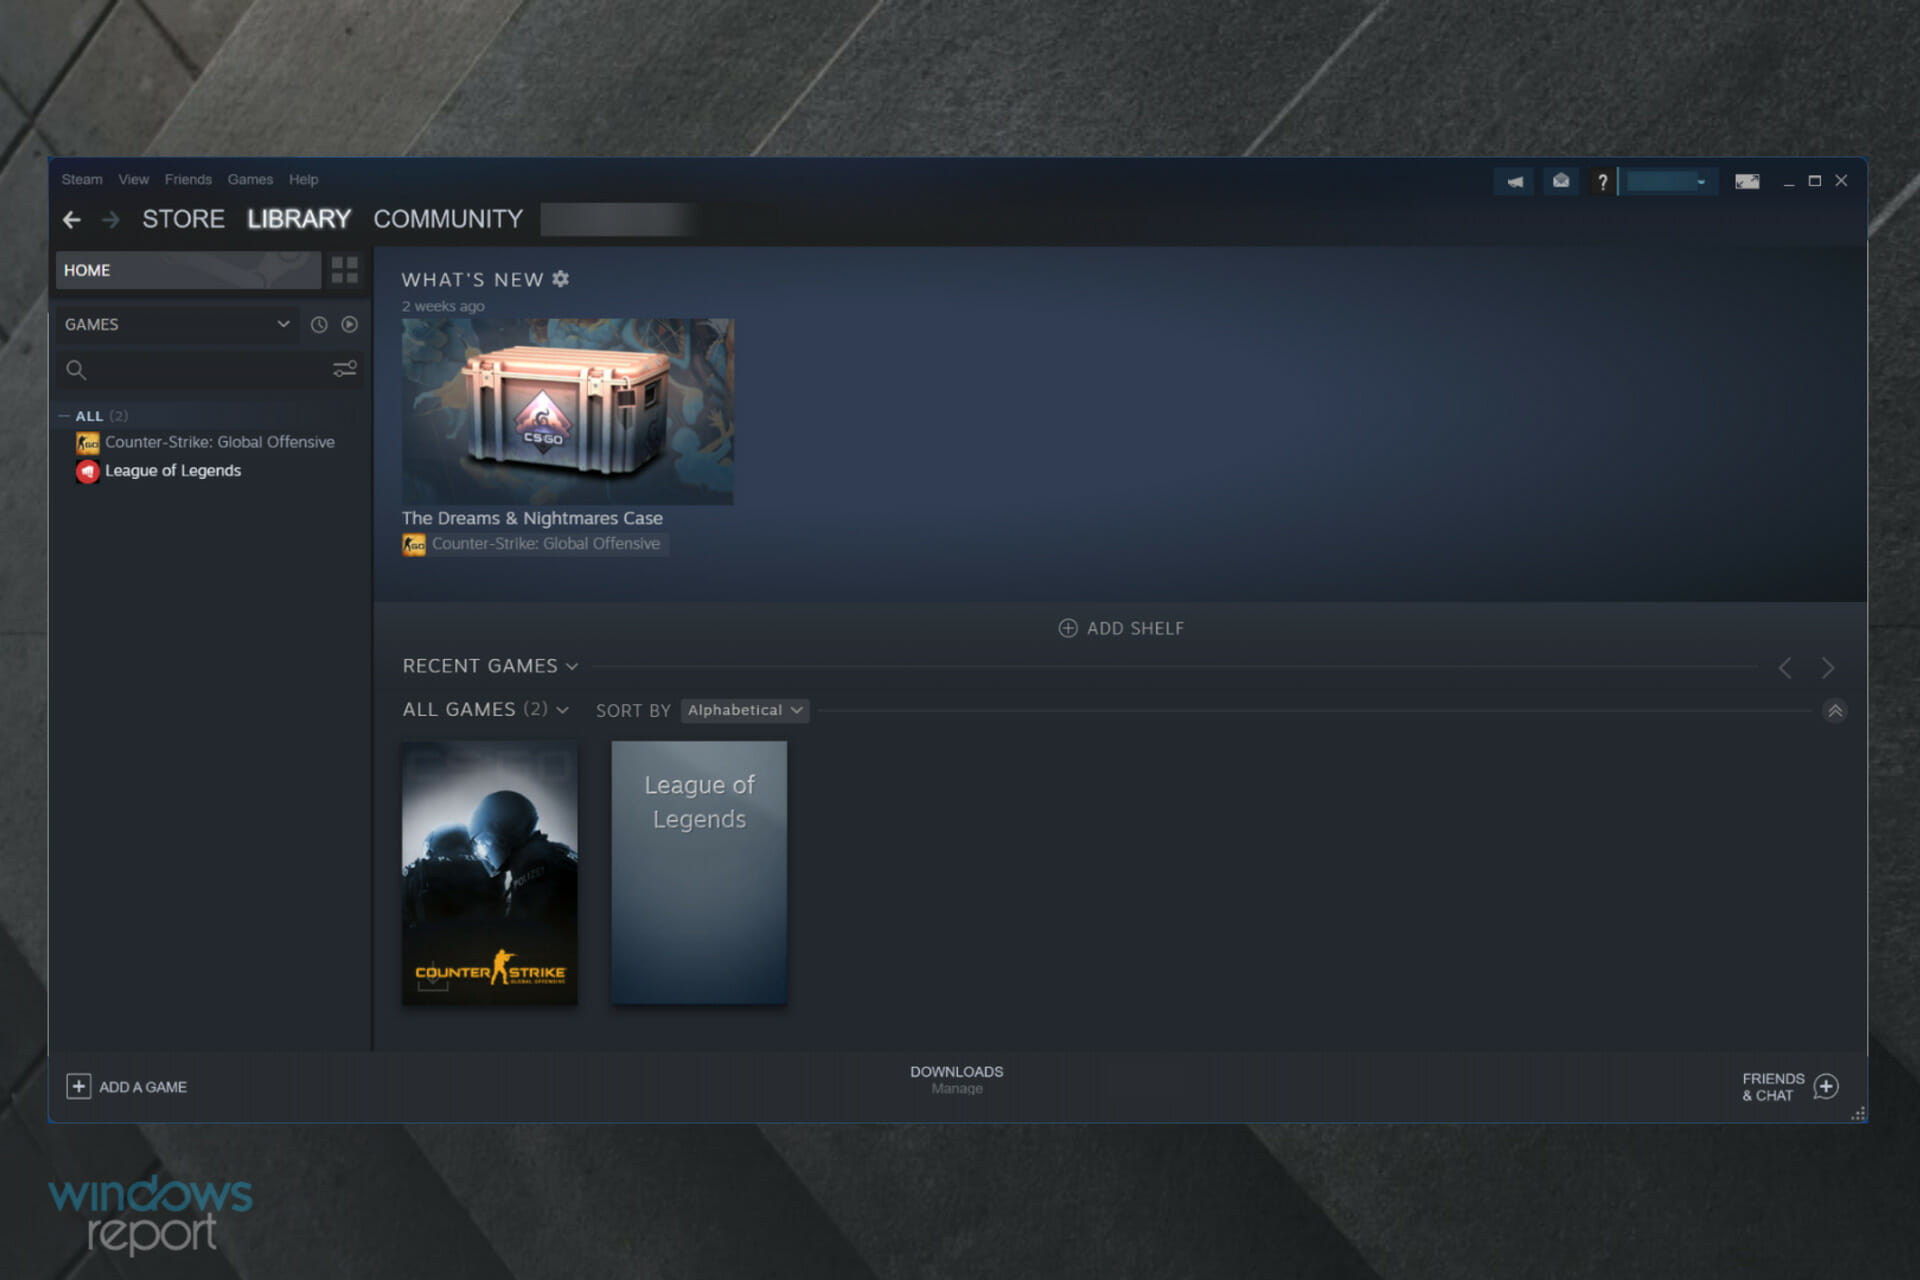 Steam will allow players to hide games from their friends - Video